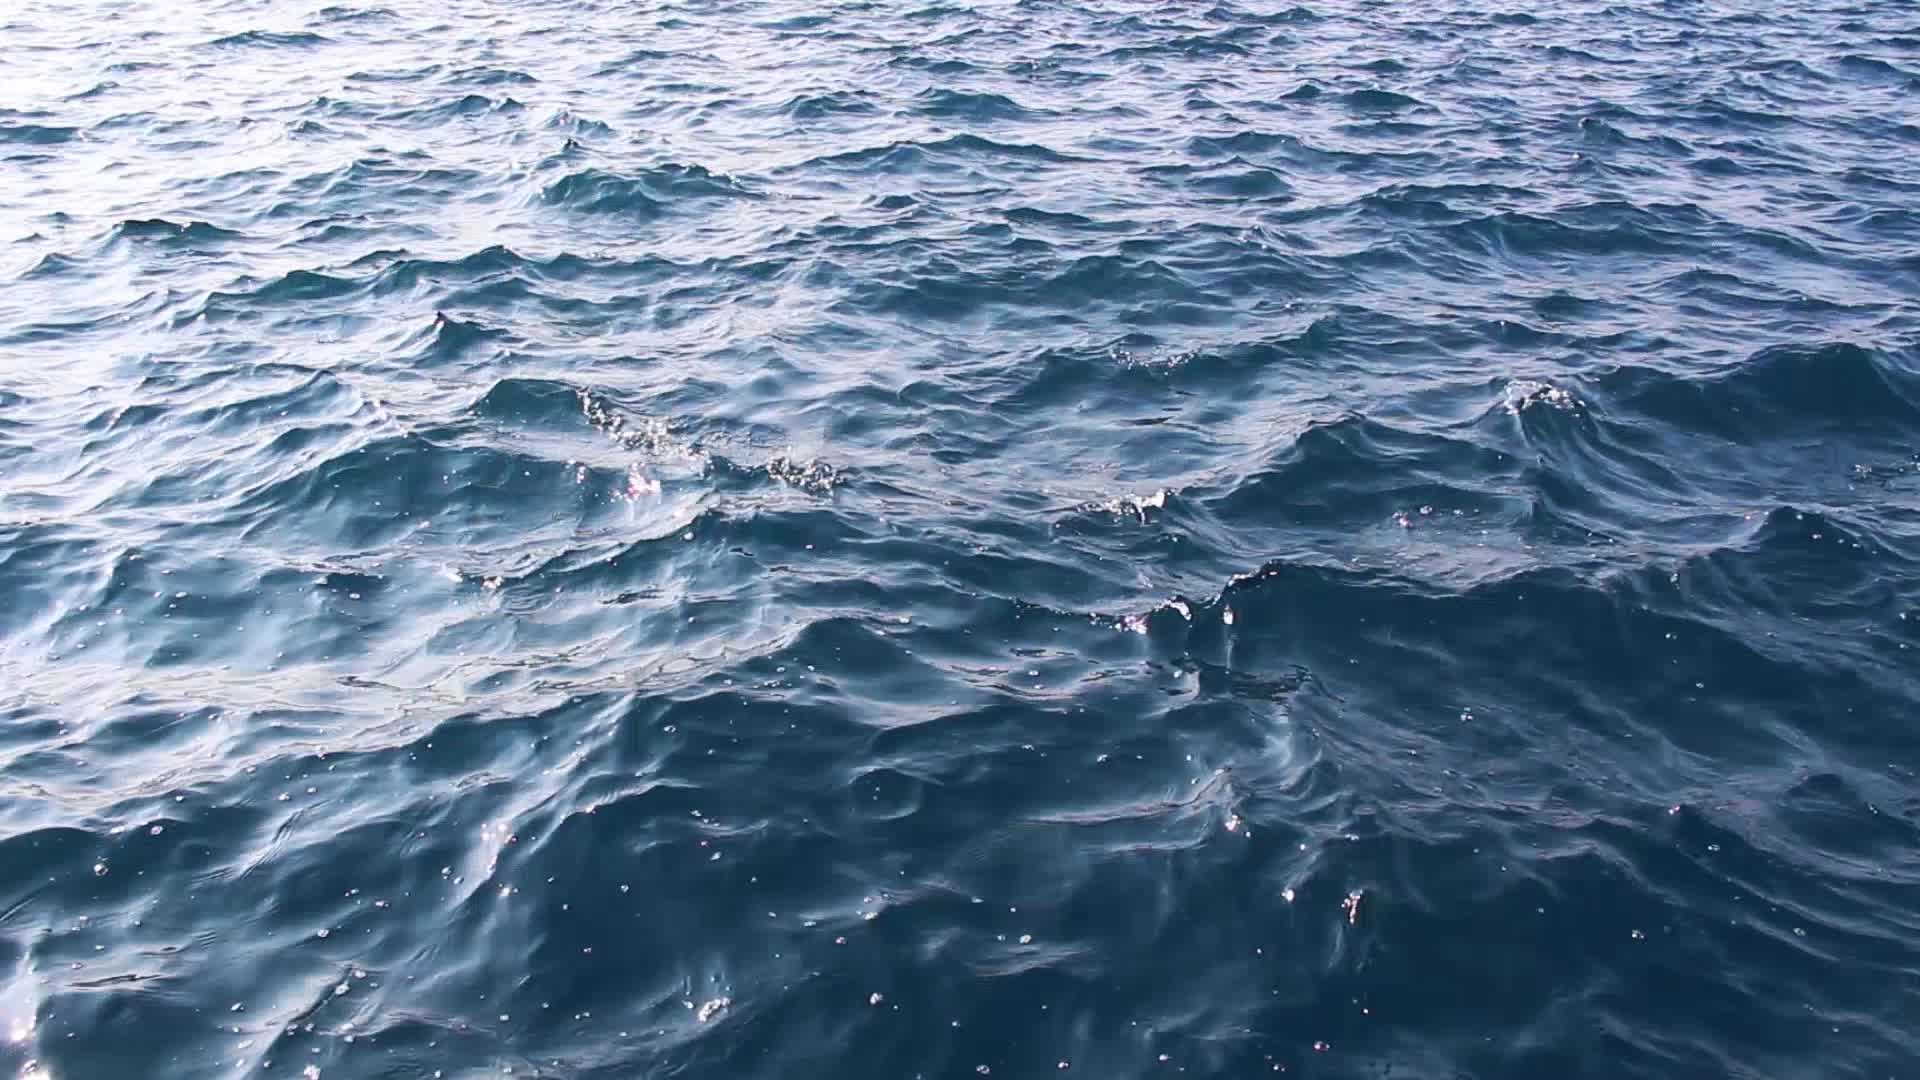 https://static.vecteezy.com/system/resources/thumbnails/001/787/449/original/blue-sea-water-background-free-video.jpg